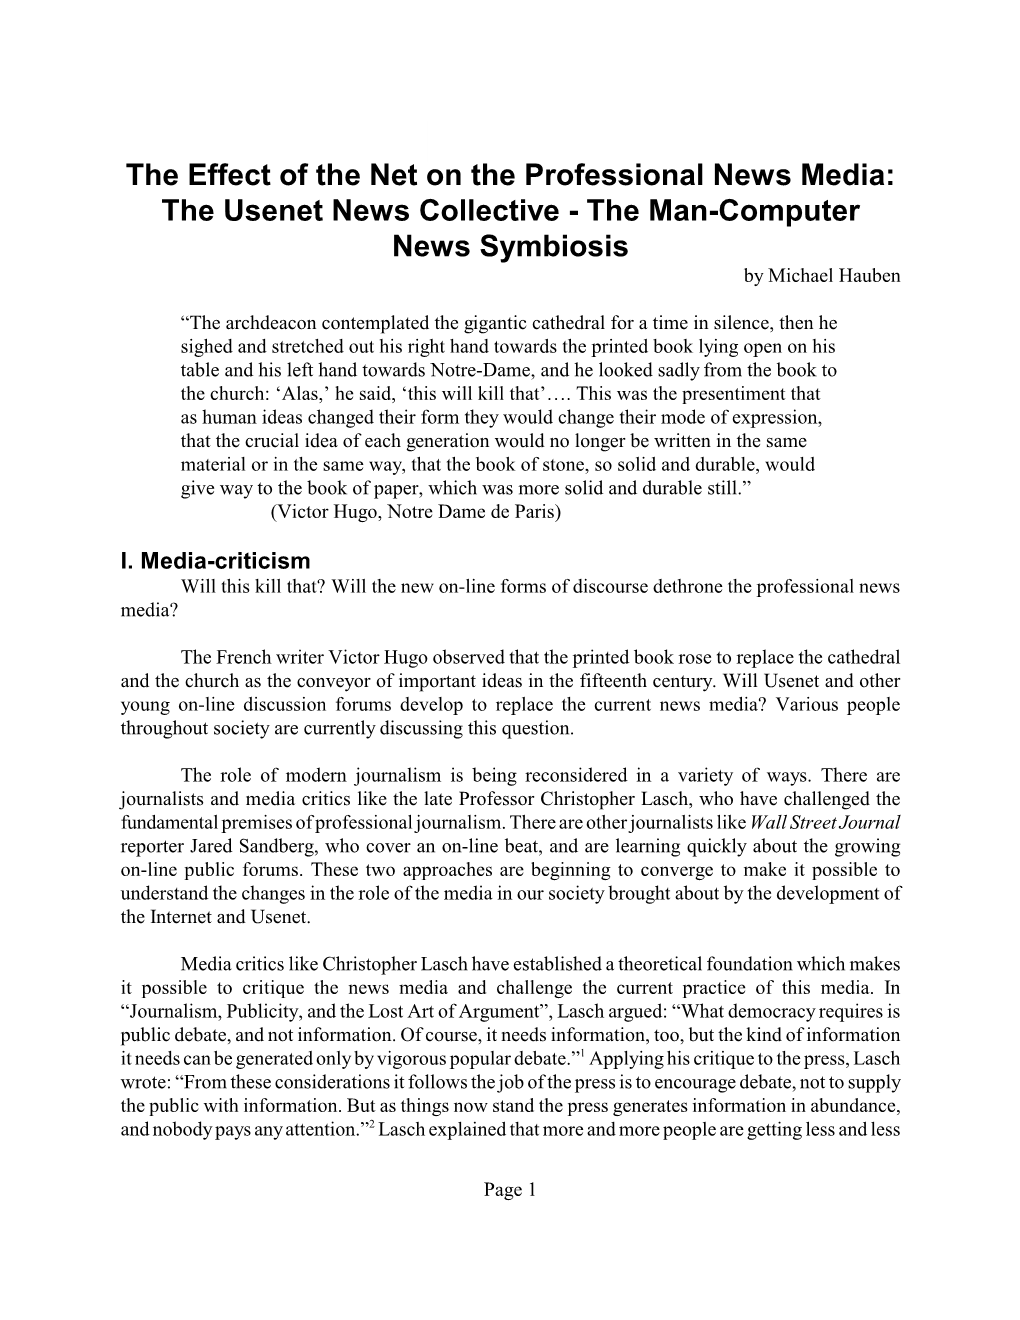 The Effect of the Net on the Professional News Media: the Usenet News Collective - the Man-Computer News Symbiosis by Michael Hauben